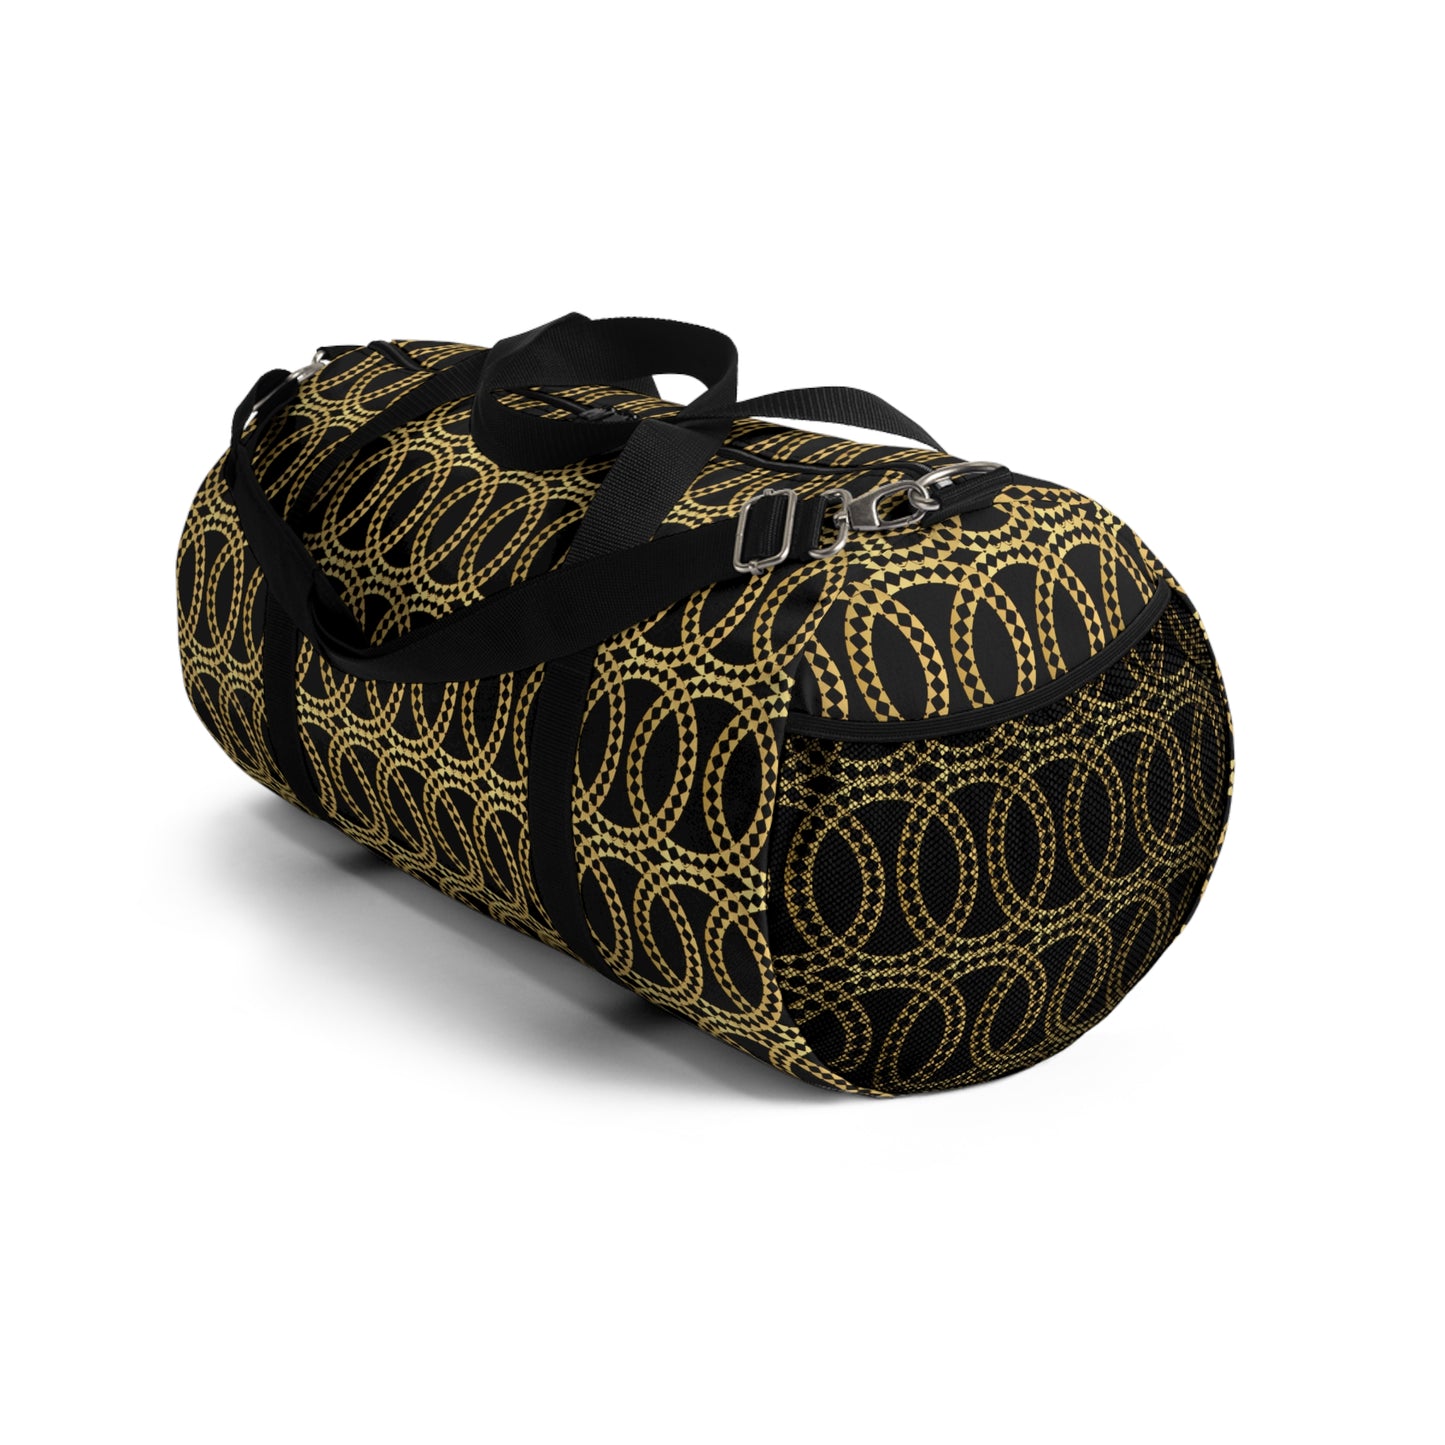 Boss Babes Up Your Game: Golden Link Status Duffel Bag Made in USA